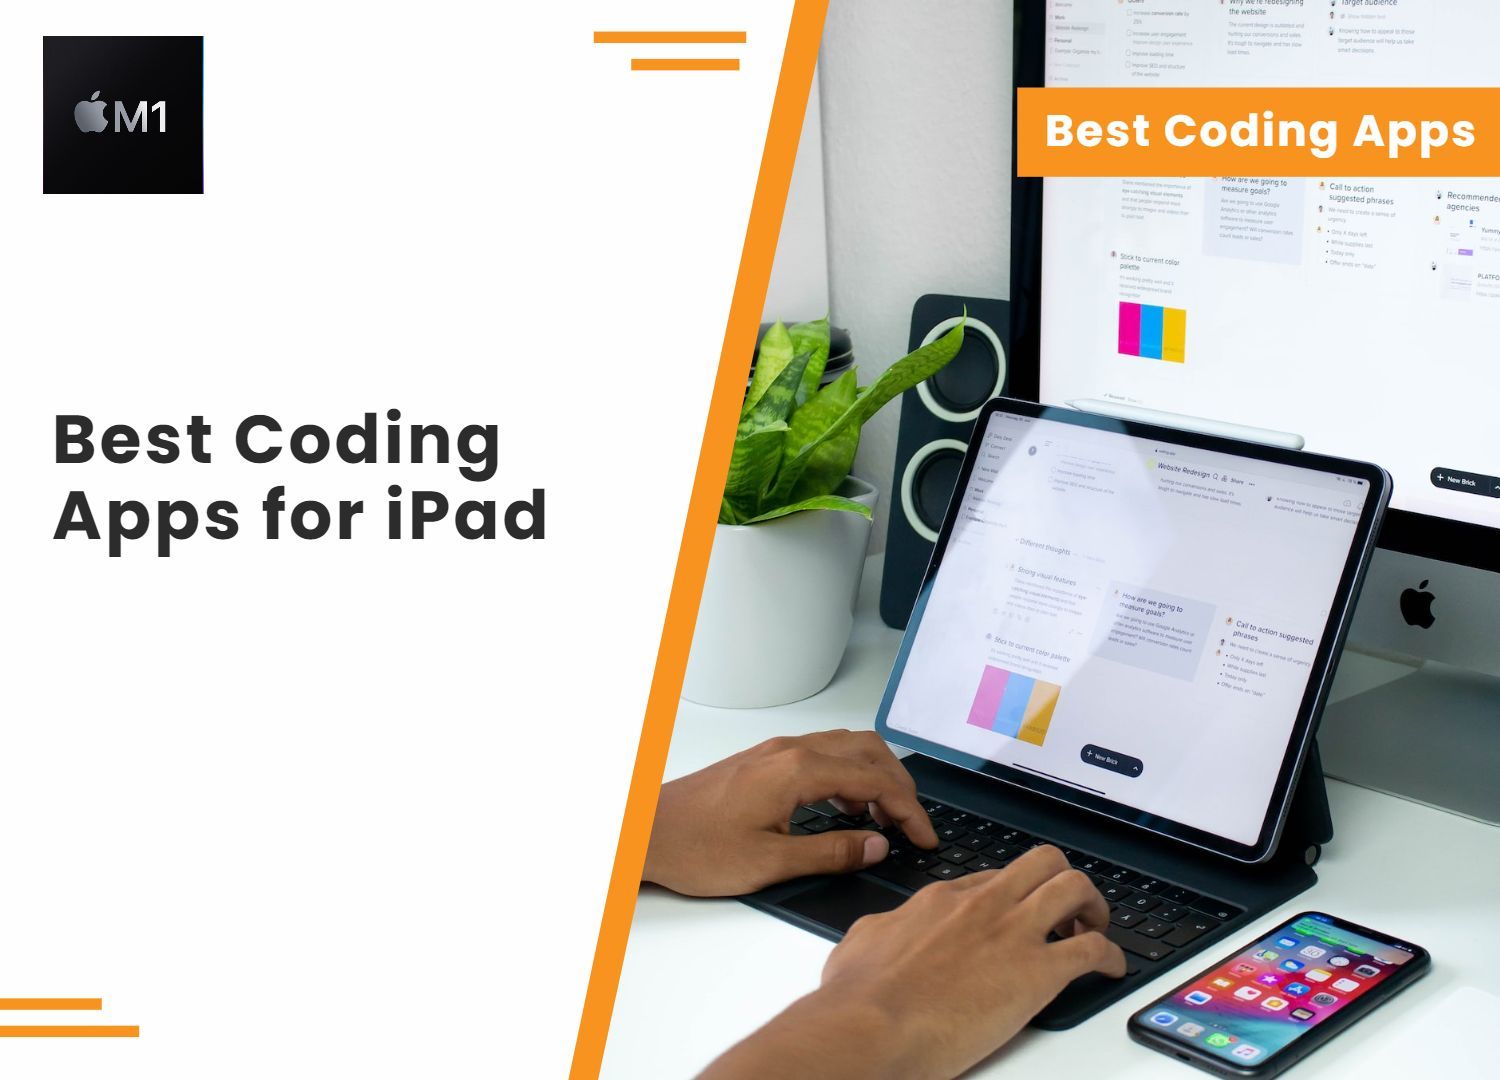 Best Coding Apps for iPad